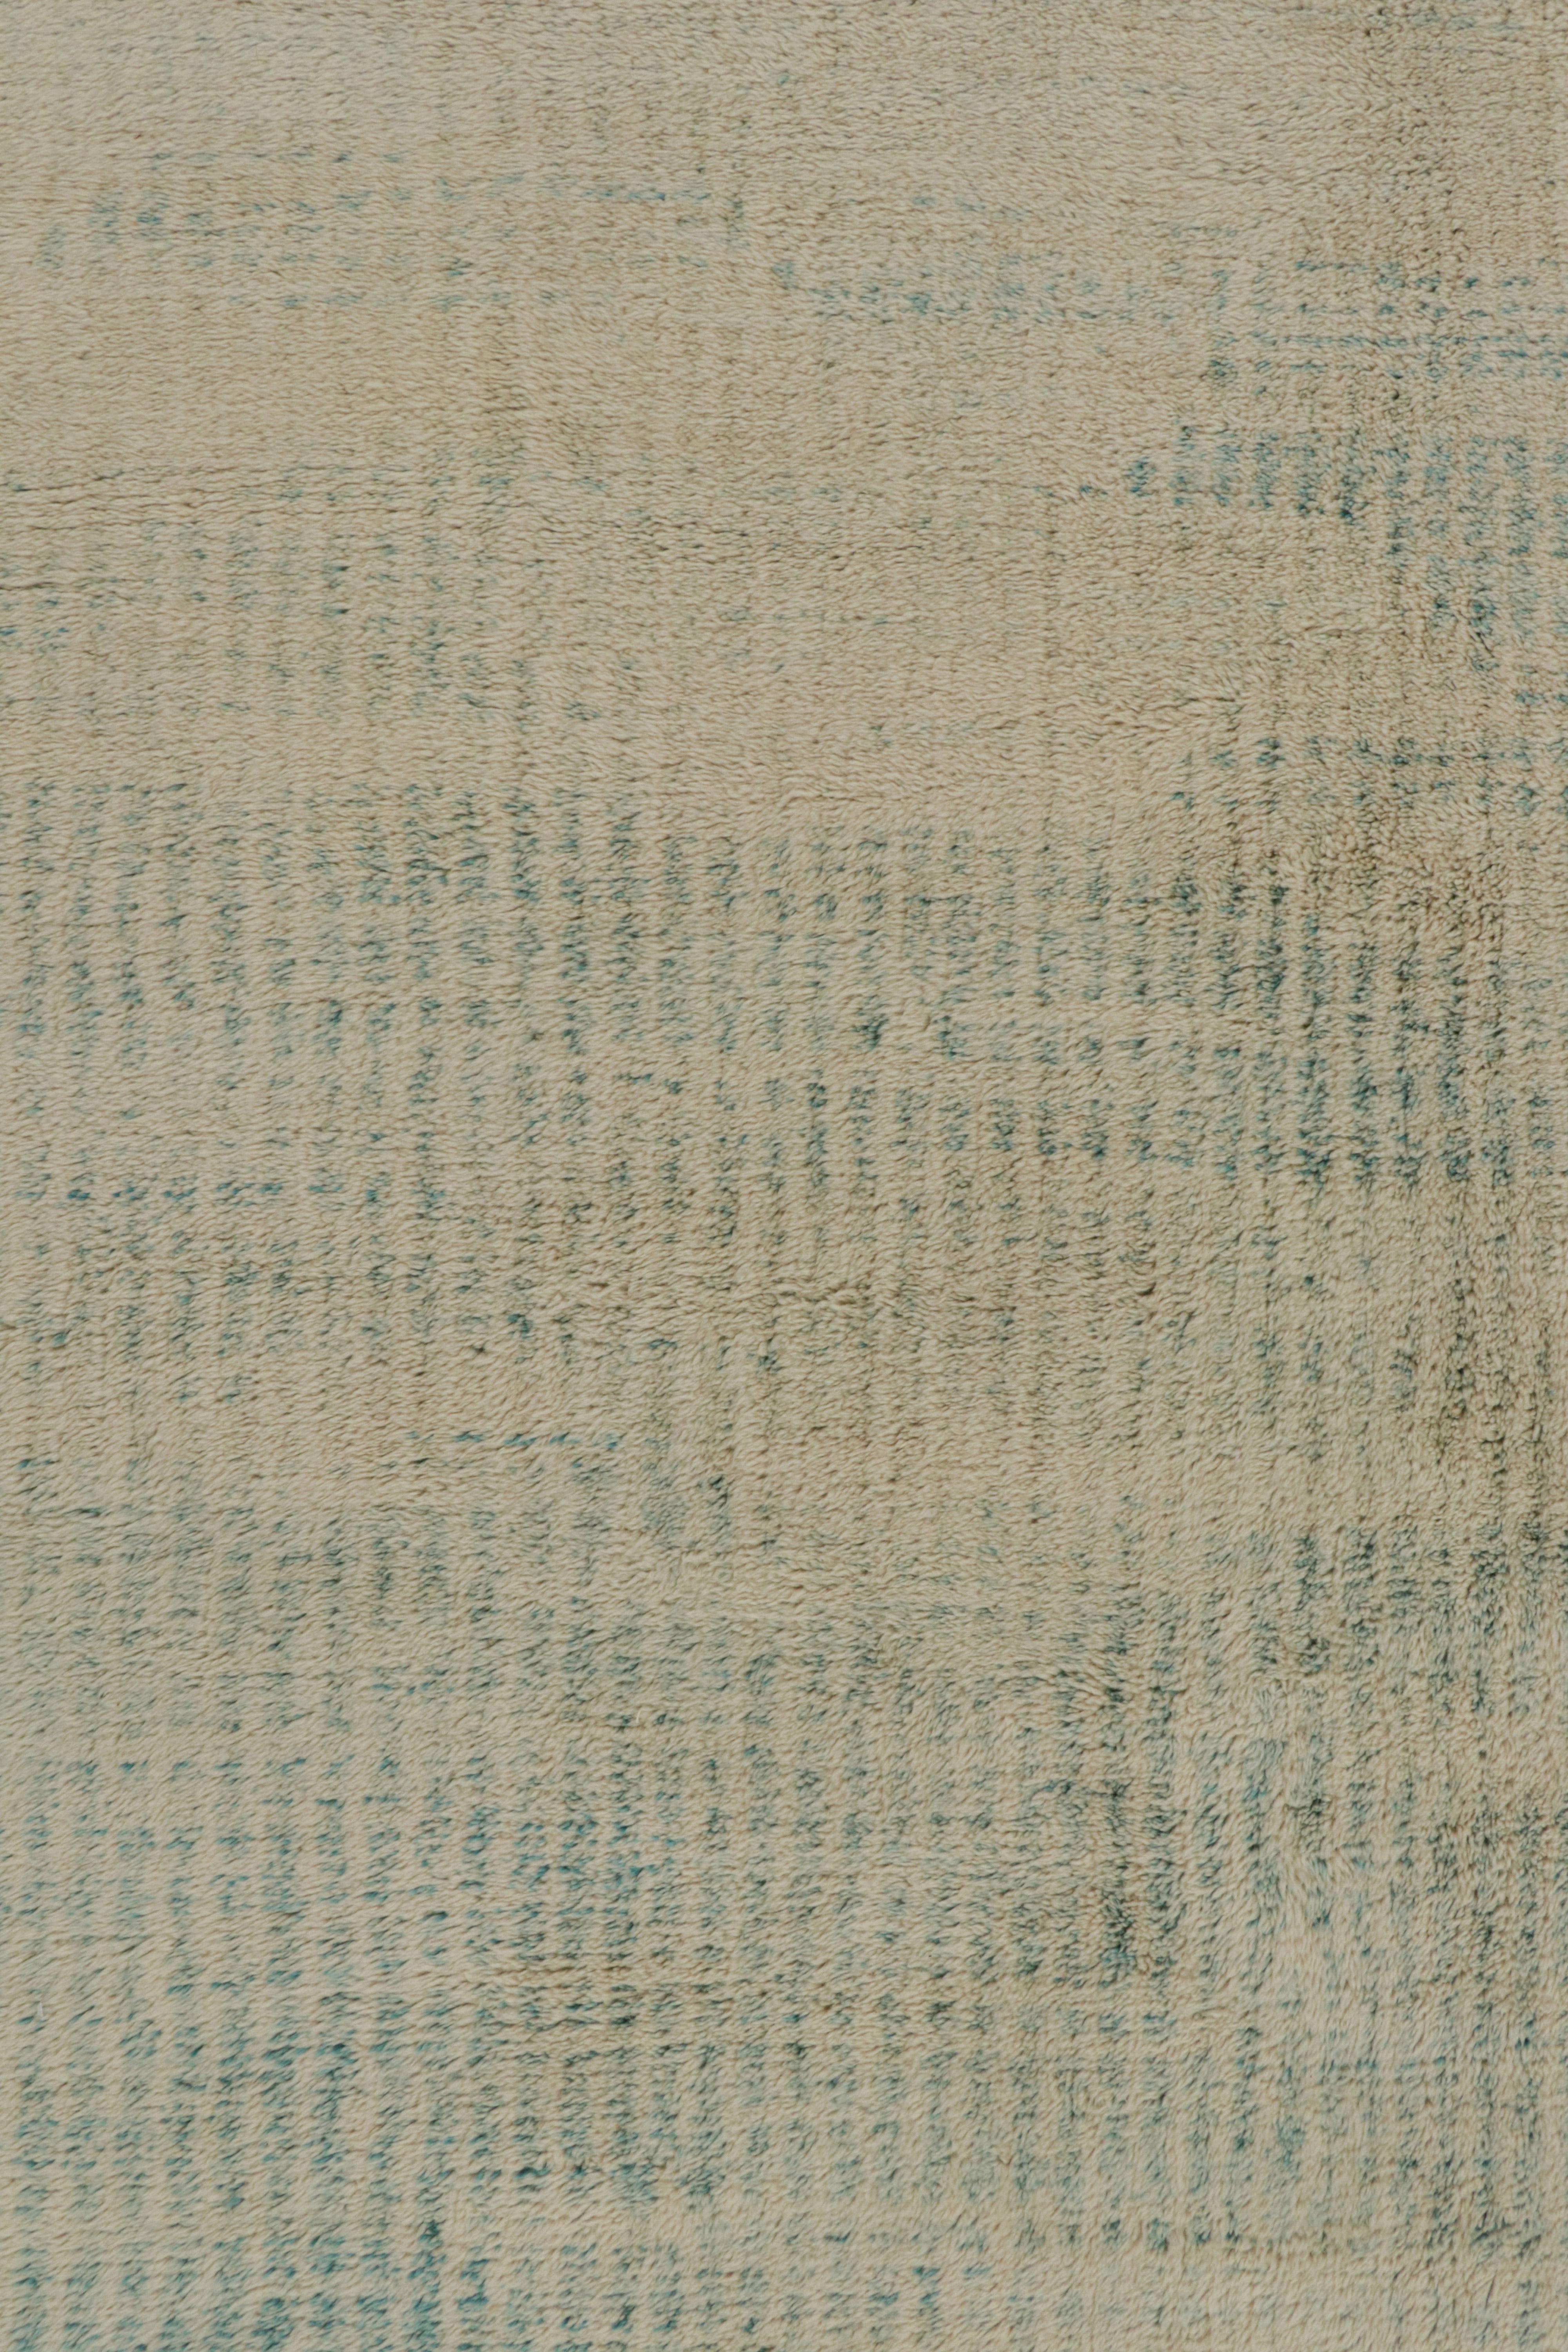 Contemporary Rug & Kilim’s Moroccan Rug with Beige and Light Blue Stripes in Lush Pile For Sale